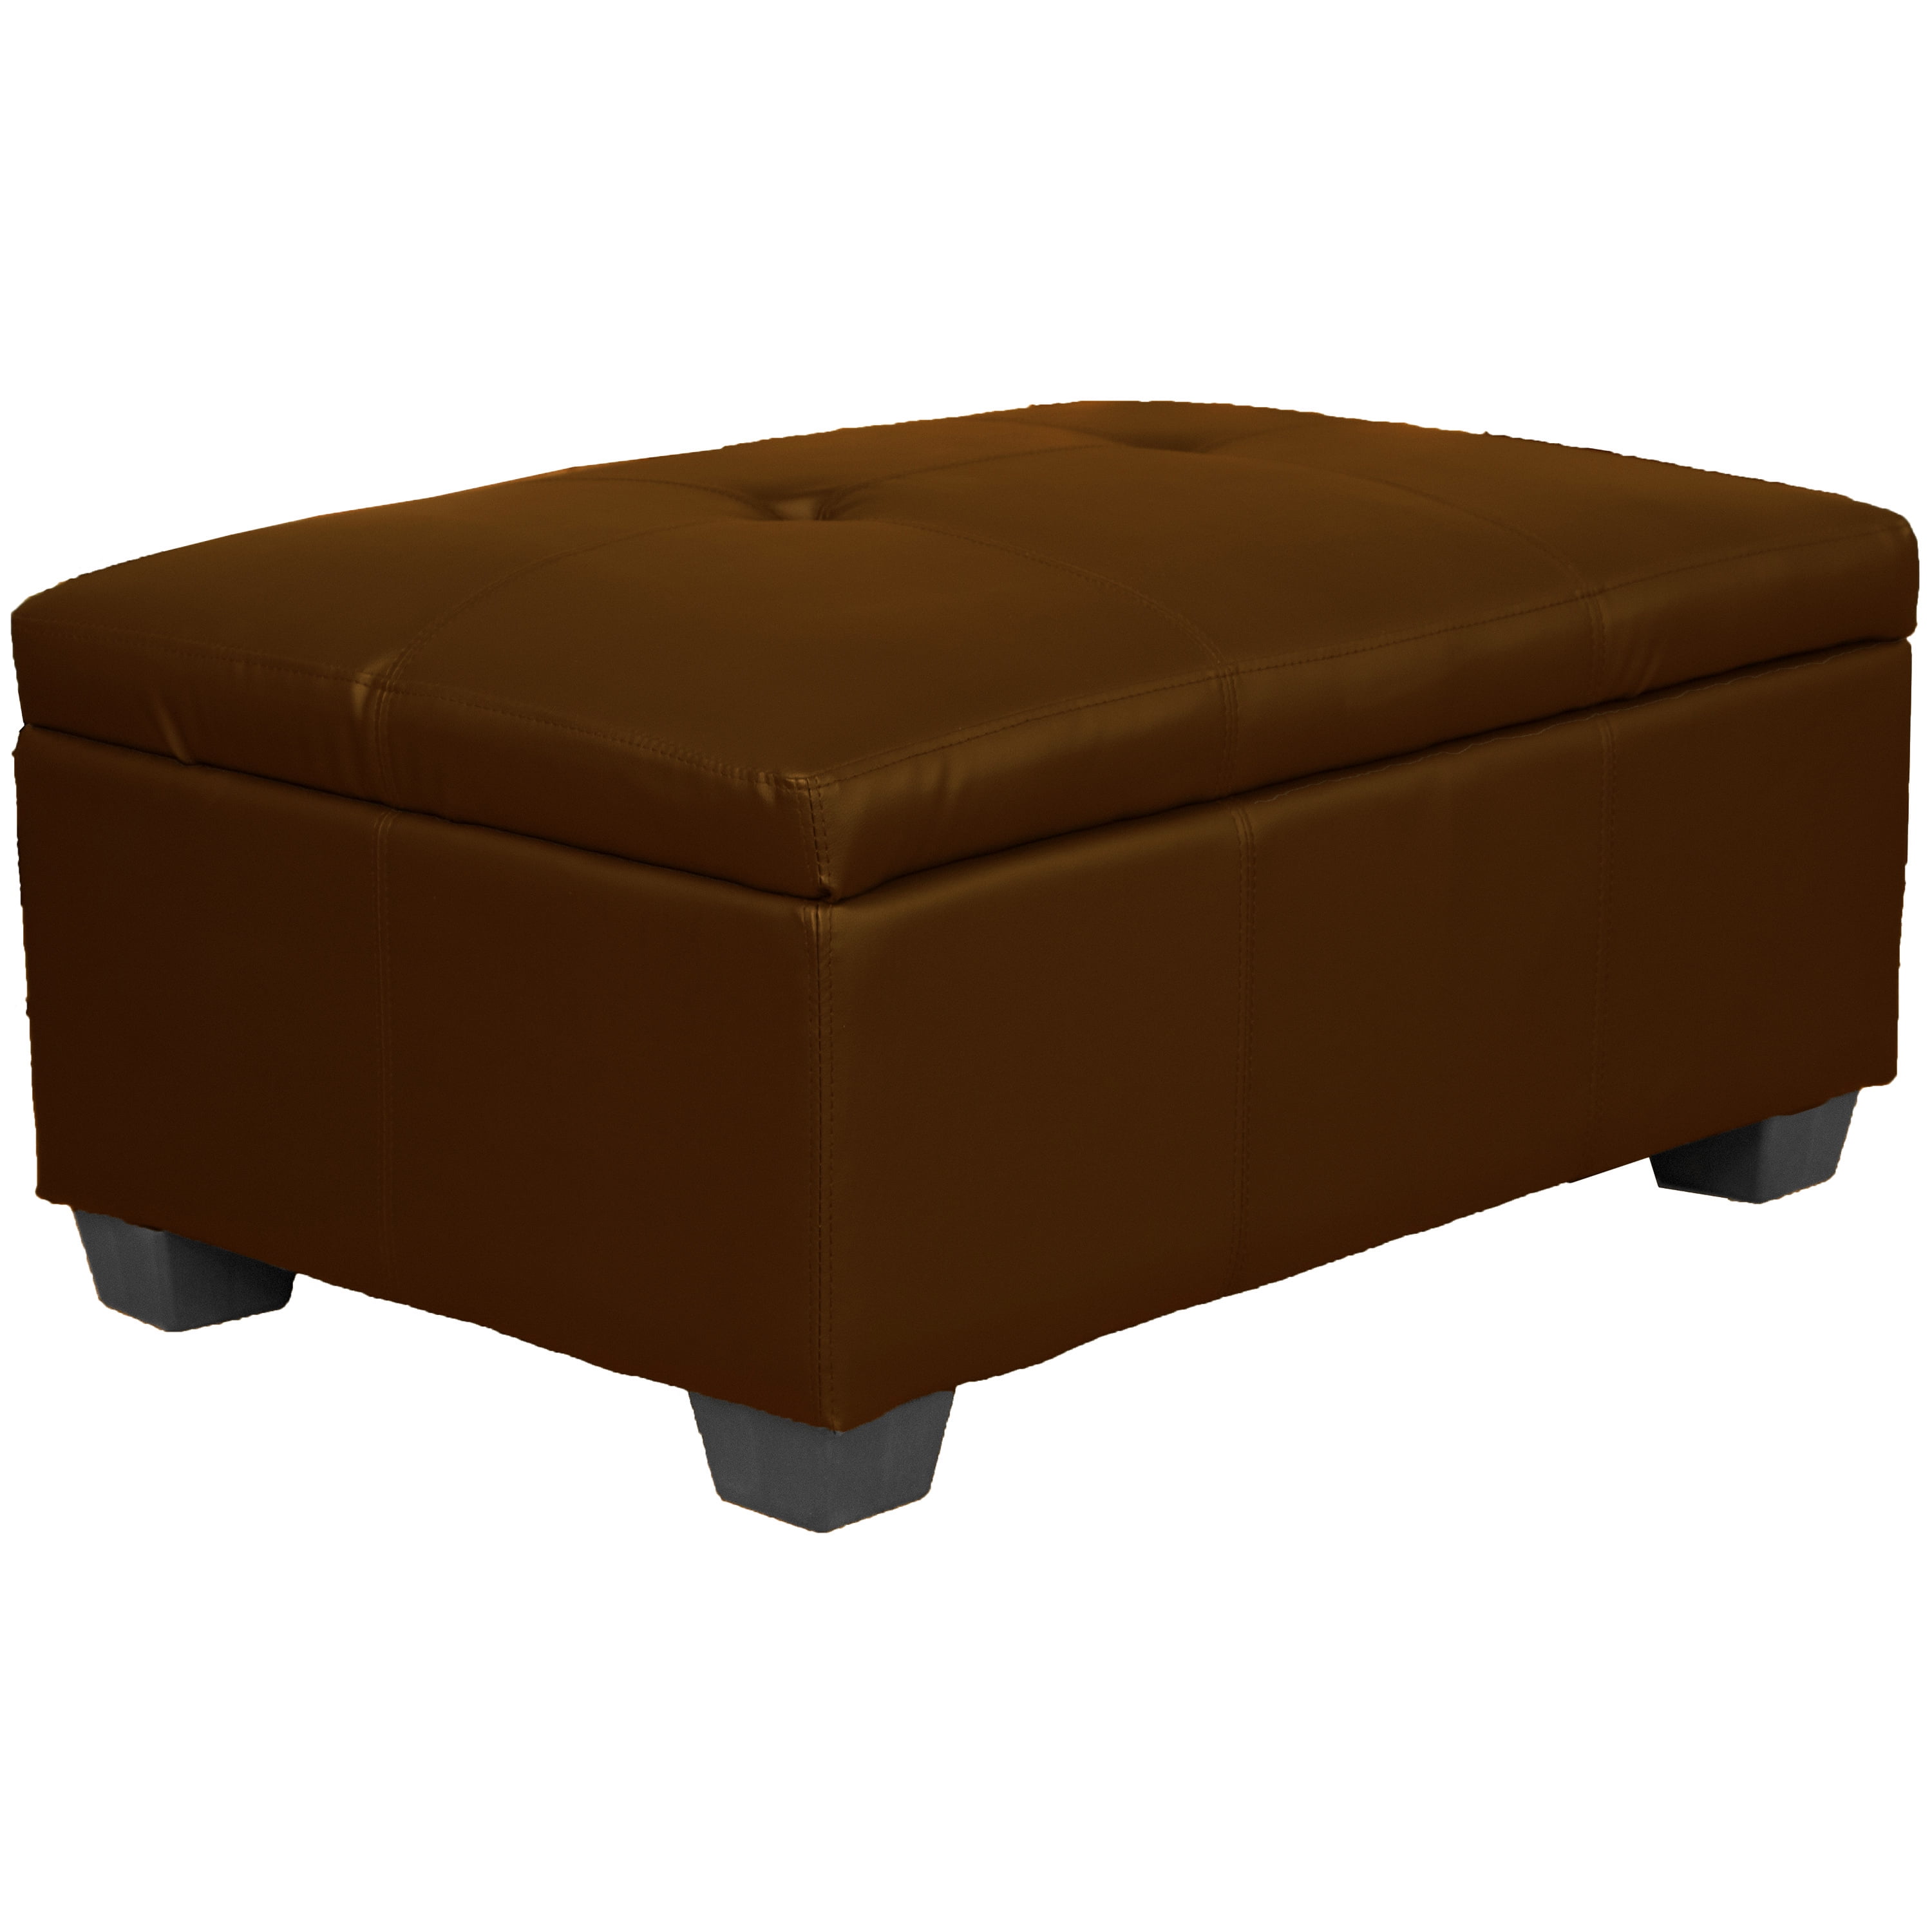 Timeless 36 By 24 By 18 Inch Storage Ottoman Bench